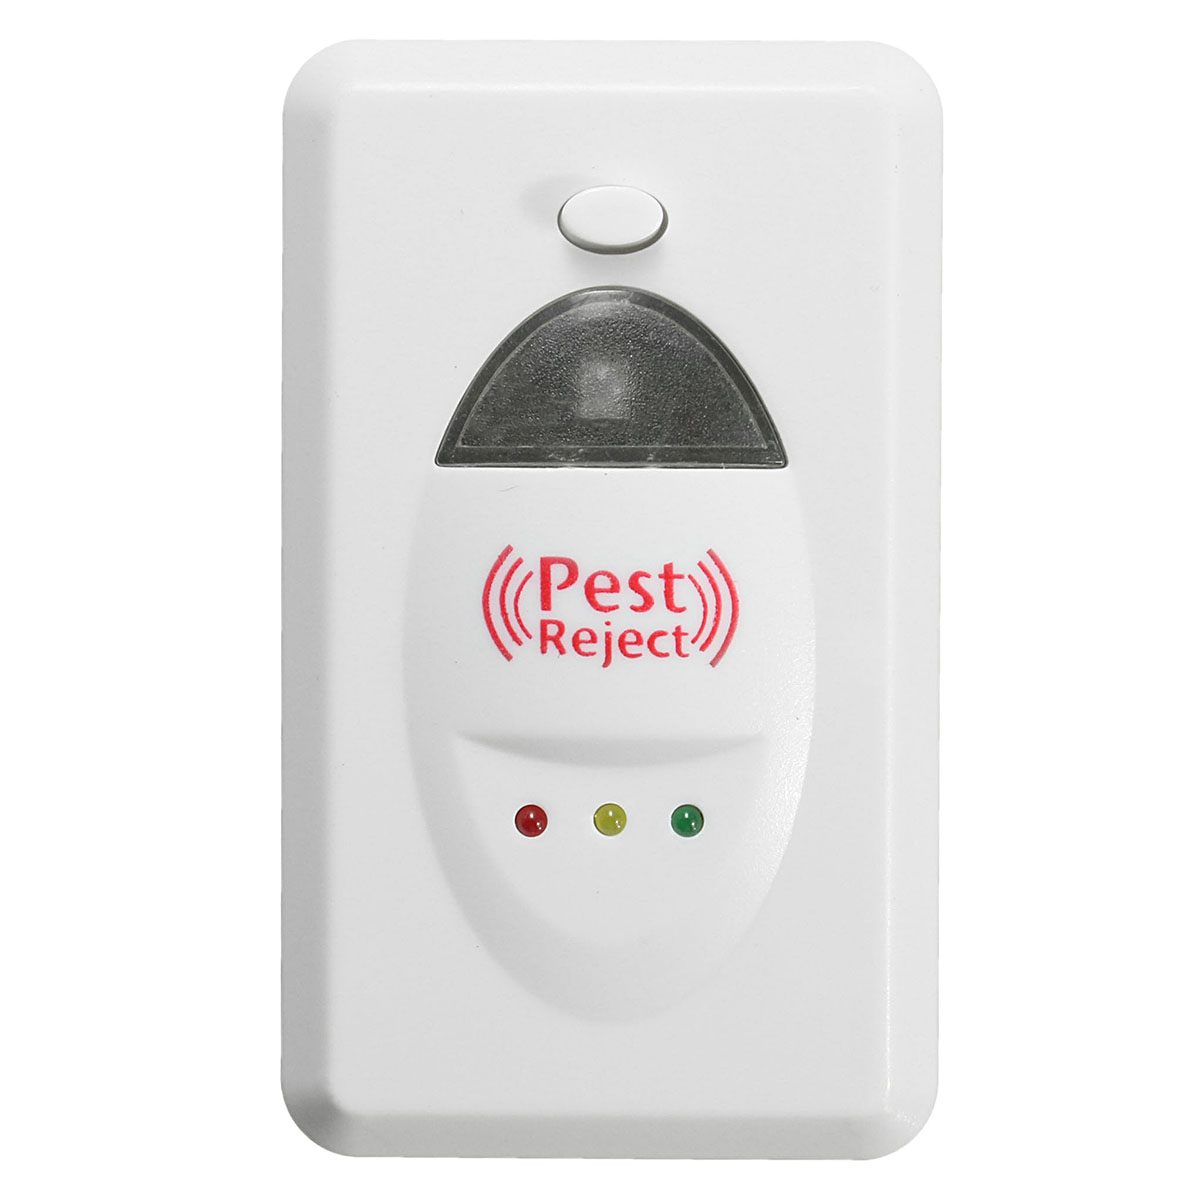 110V-Ultrasonic-Electronic-Pest-Dispeller-Reject-Anti-Mosquito-Bug-Insect-Enhanced-PVC-1612001-5